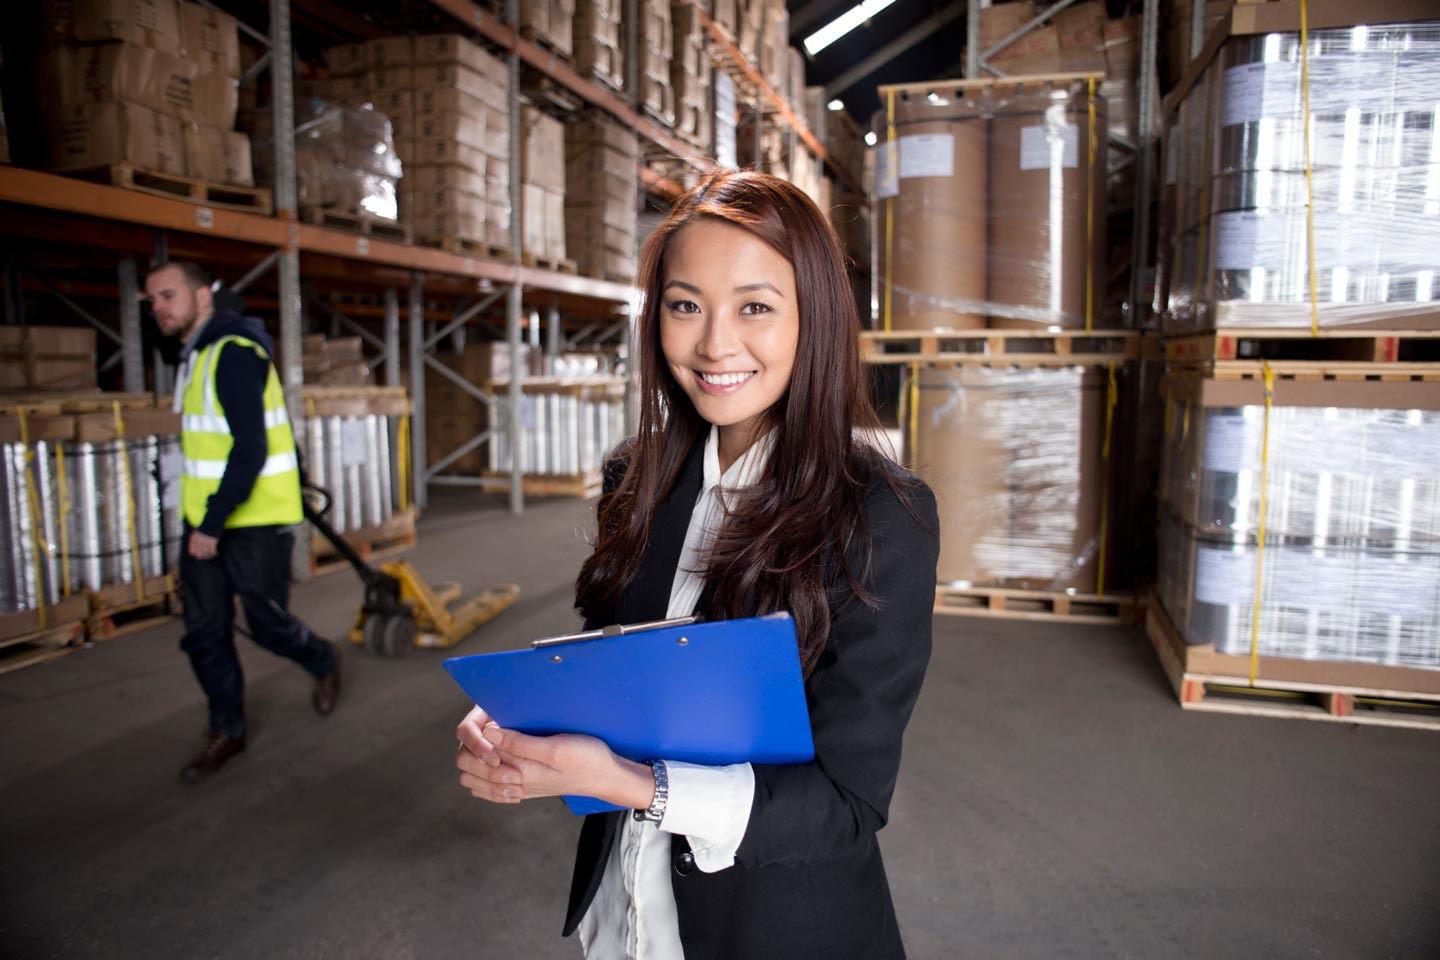 A manager takes stock of the warehouse with a blue clipboard.